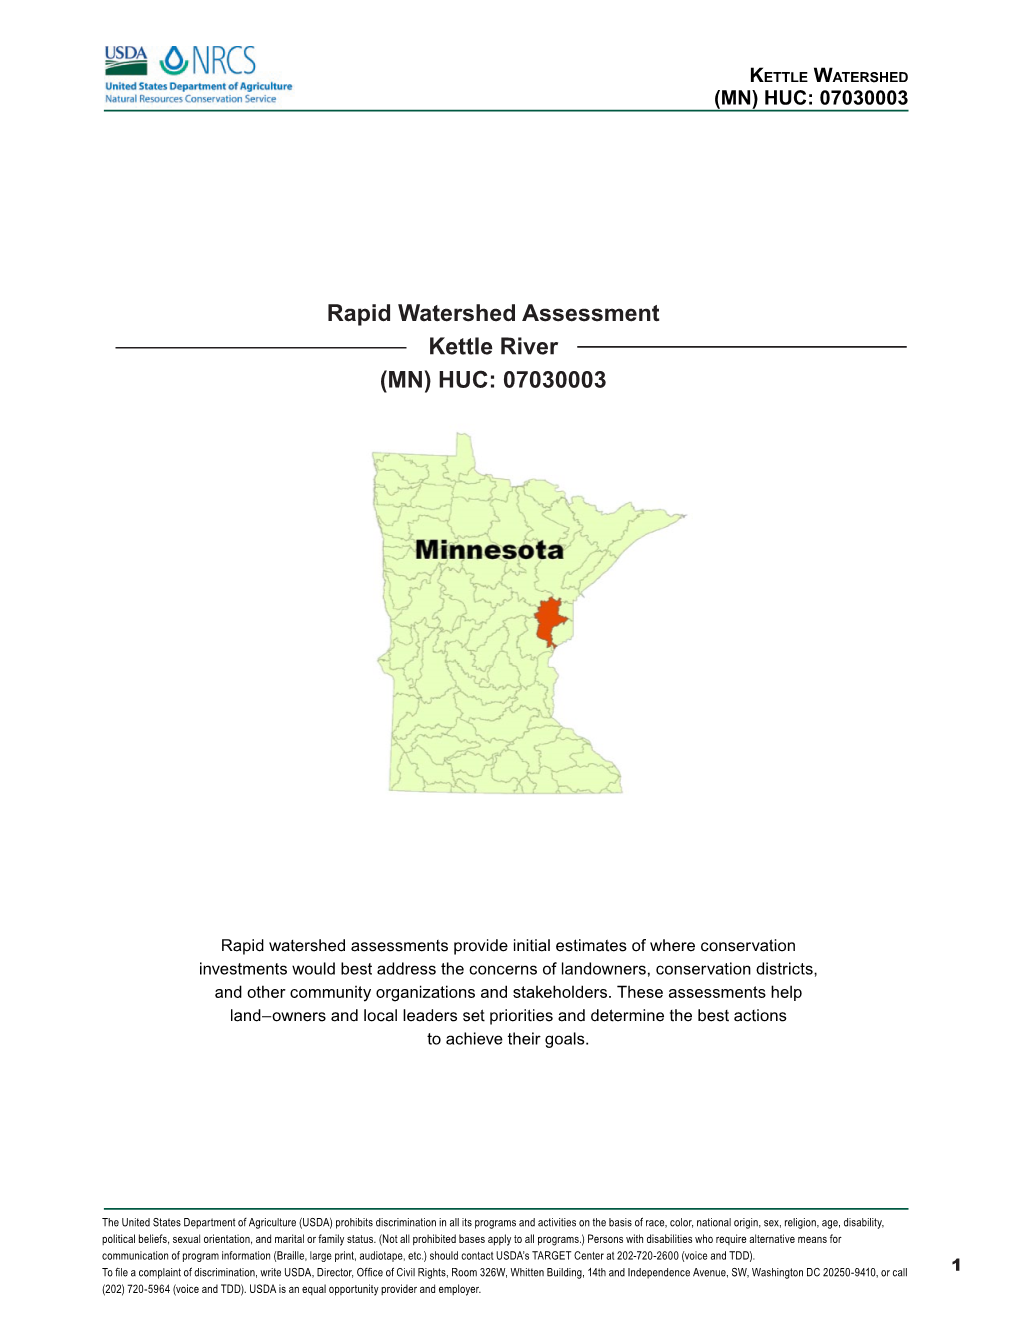 Rapid Watershed Assessment Kettle River (MN) HUC: 07030003